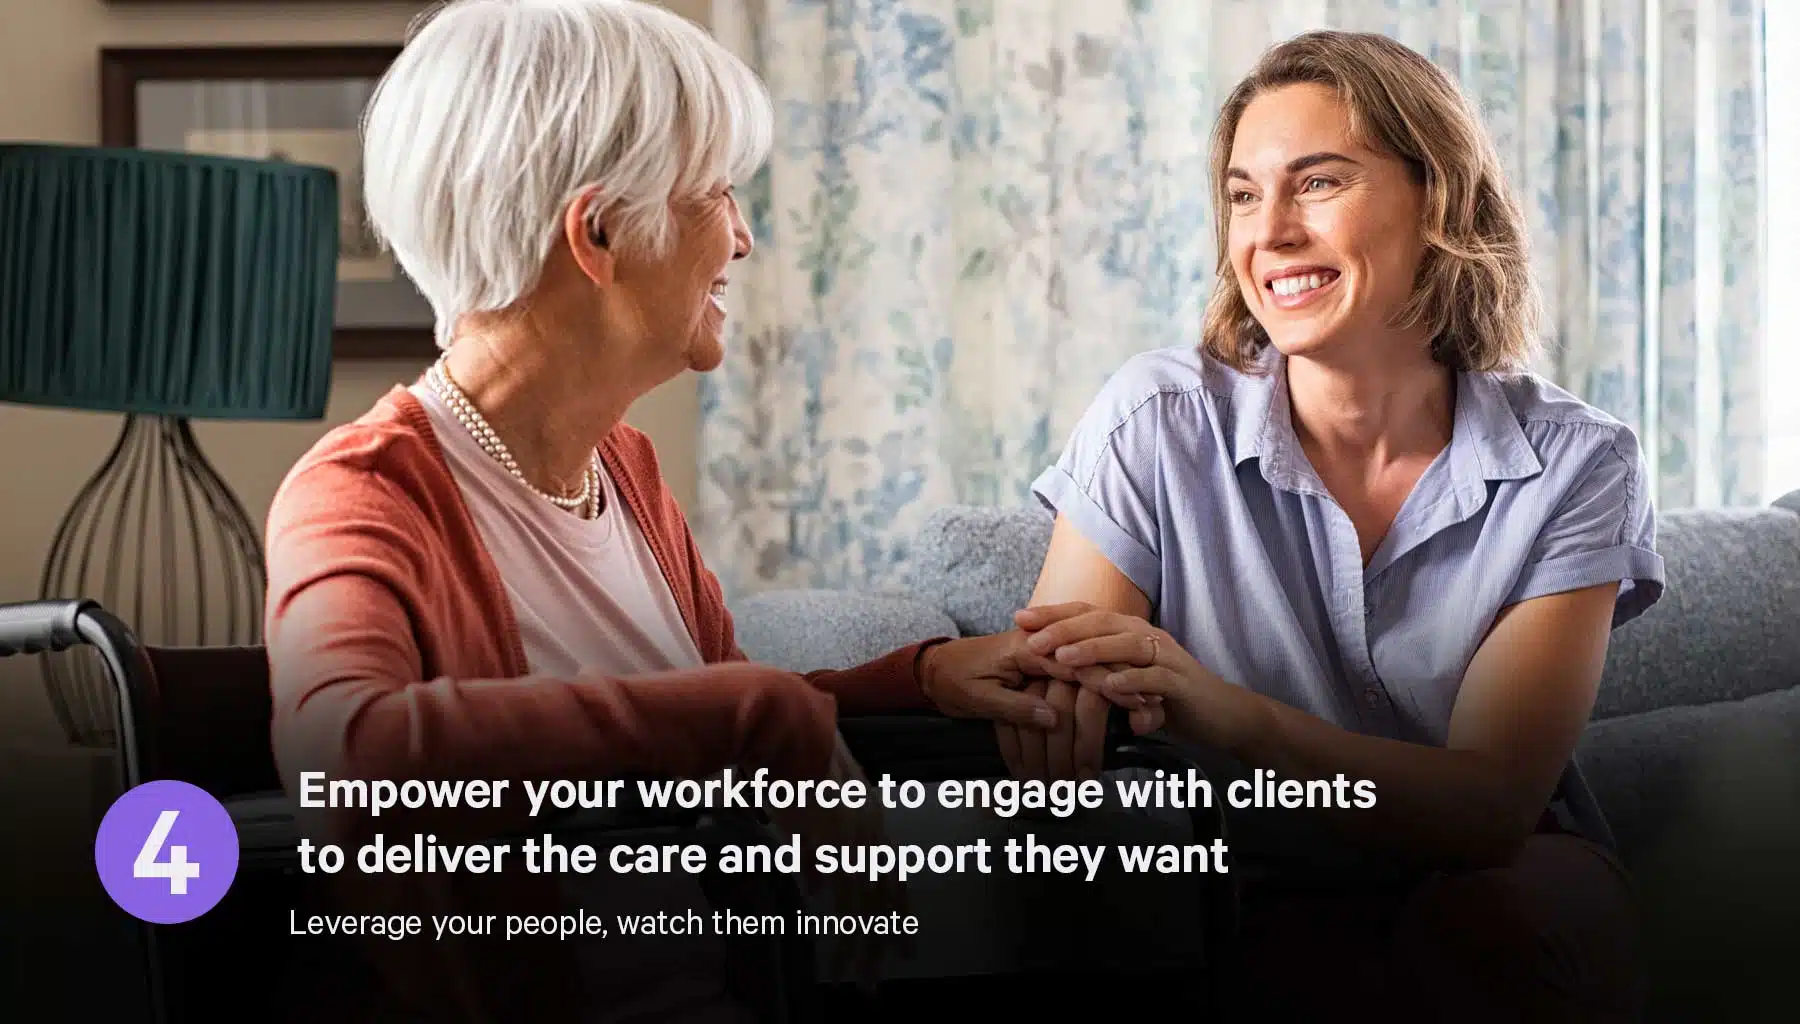 Empower your workforce to engage with clients to deliver the care and support they want